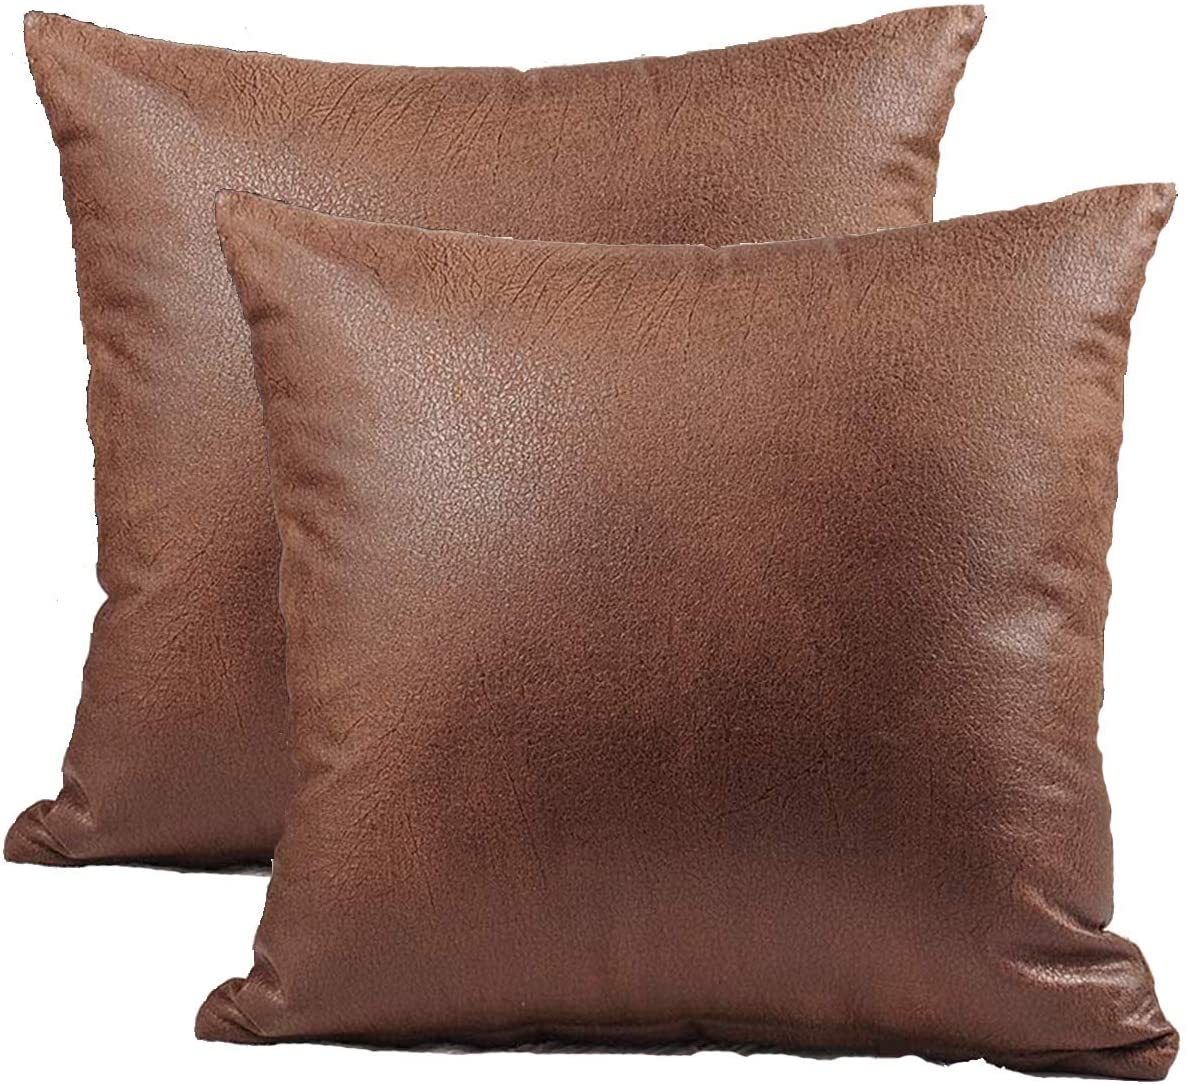 Set of 2 Faux Leather and Linen Throw Pillow Cover 18x18 inch – Basic  Outline Interiors